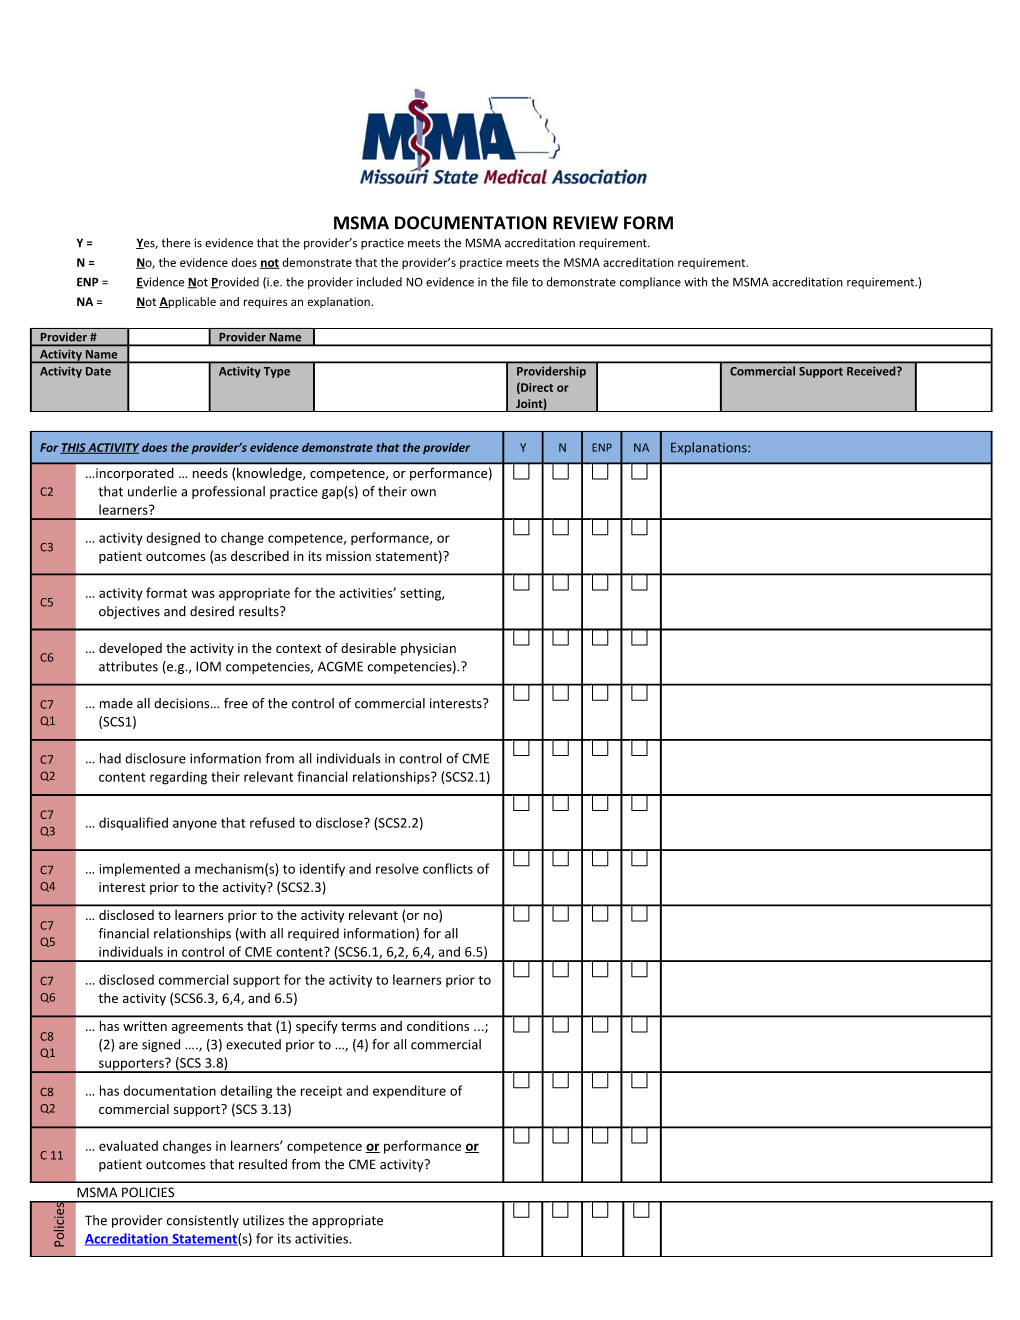 Documentation Review Form - UPDATED February 2014